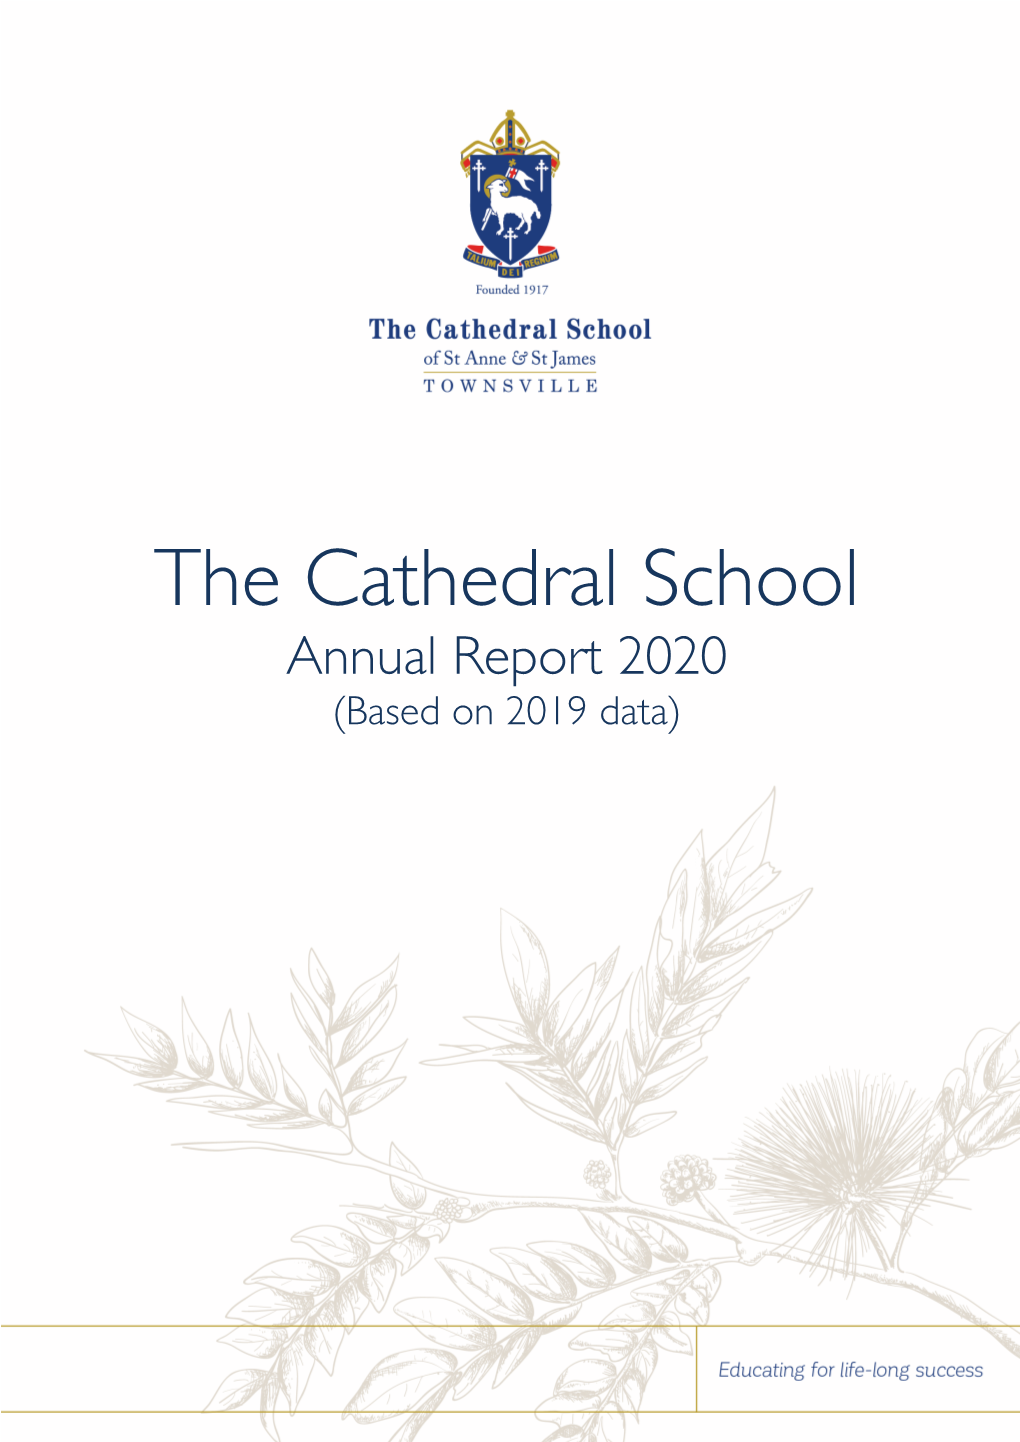 The Cathedral School of St Anne & St James Annual Report 2020